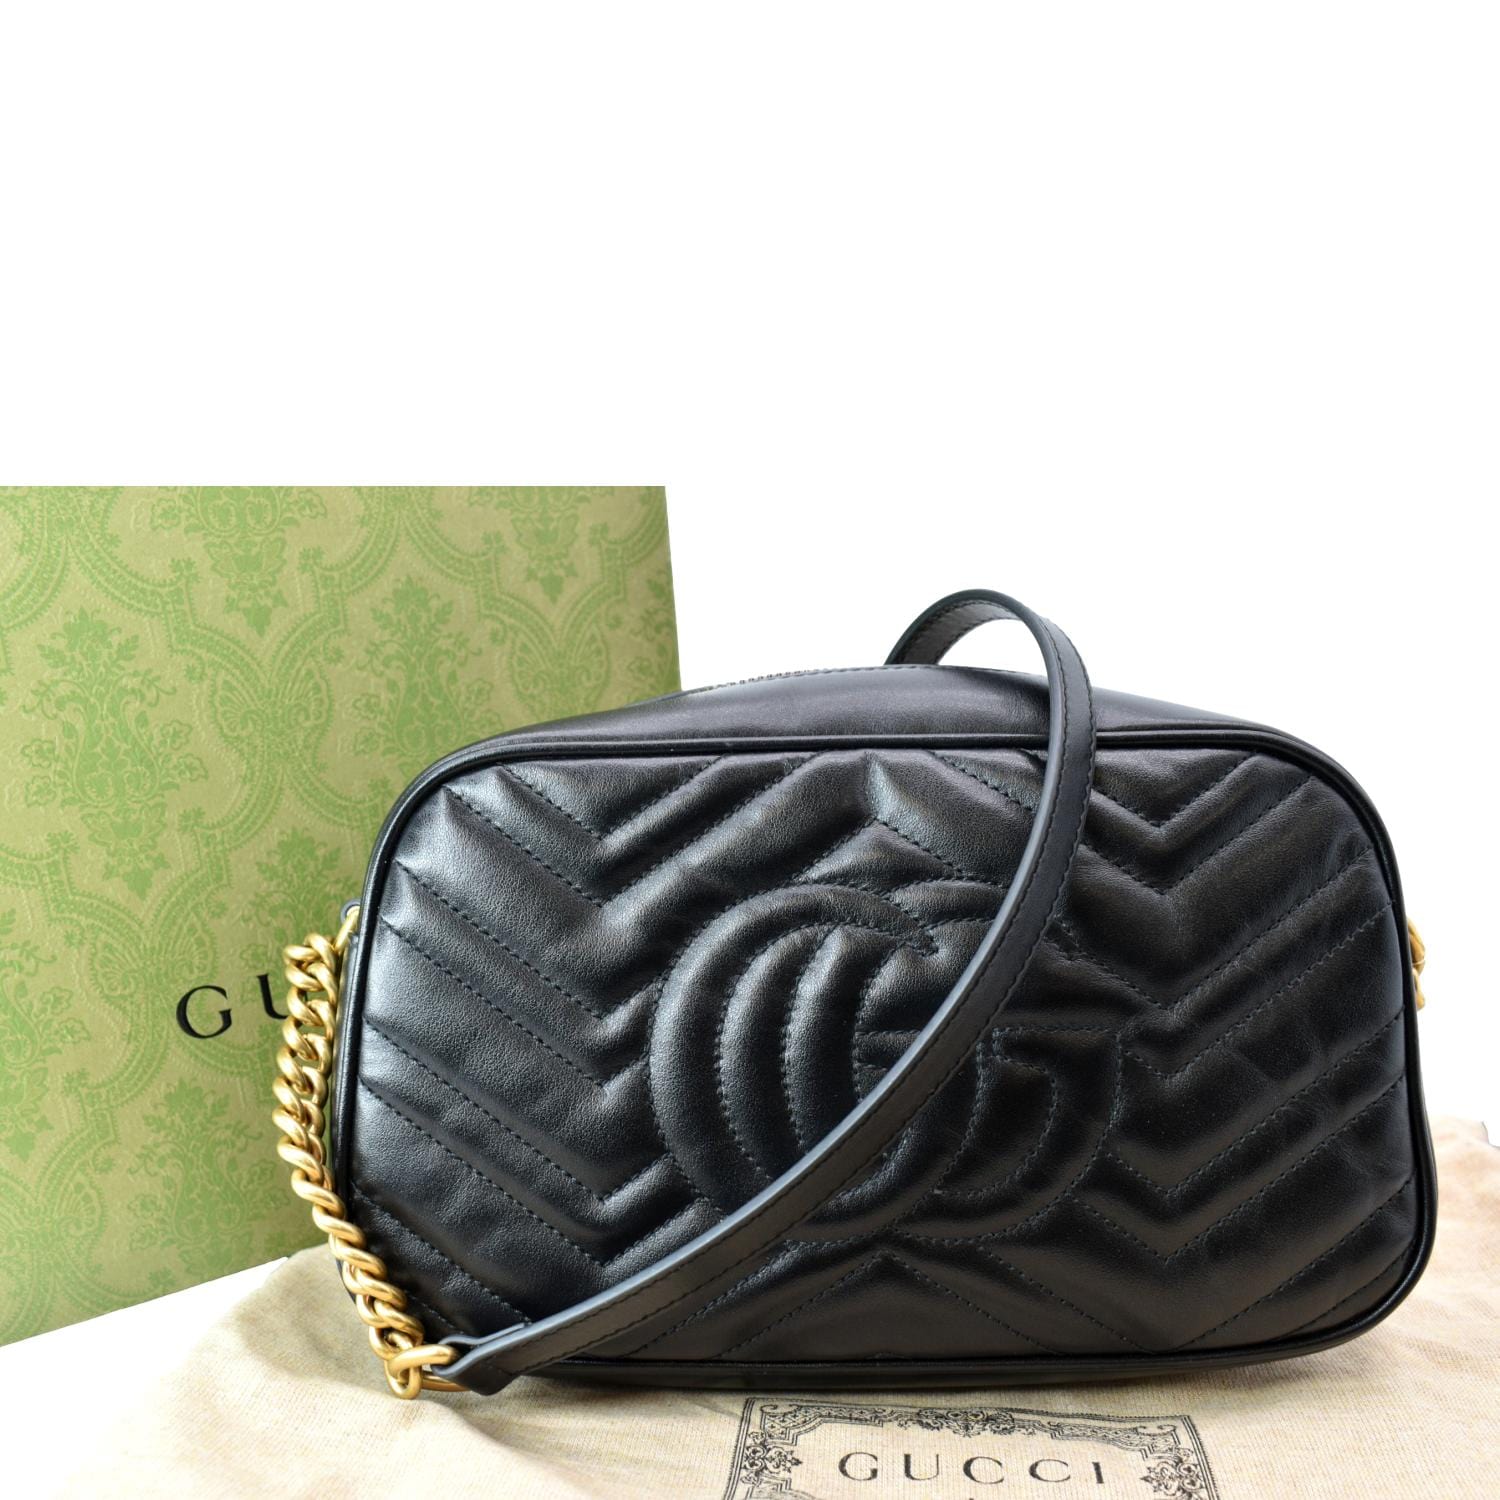 Gucci Gg Marmont Camera Mini Quilted Leather Shoulder Bag in Black